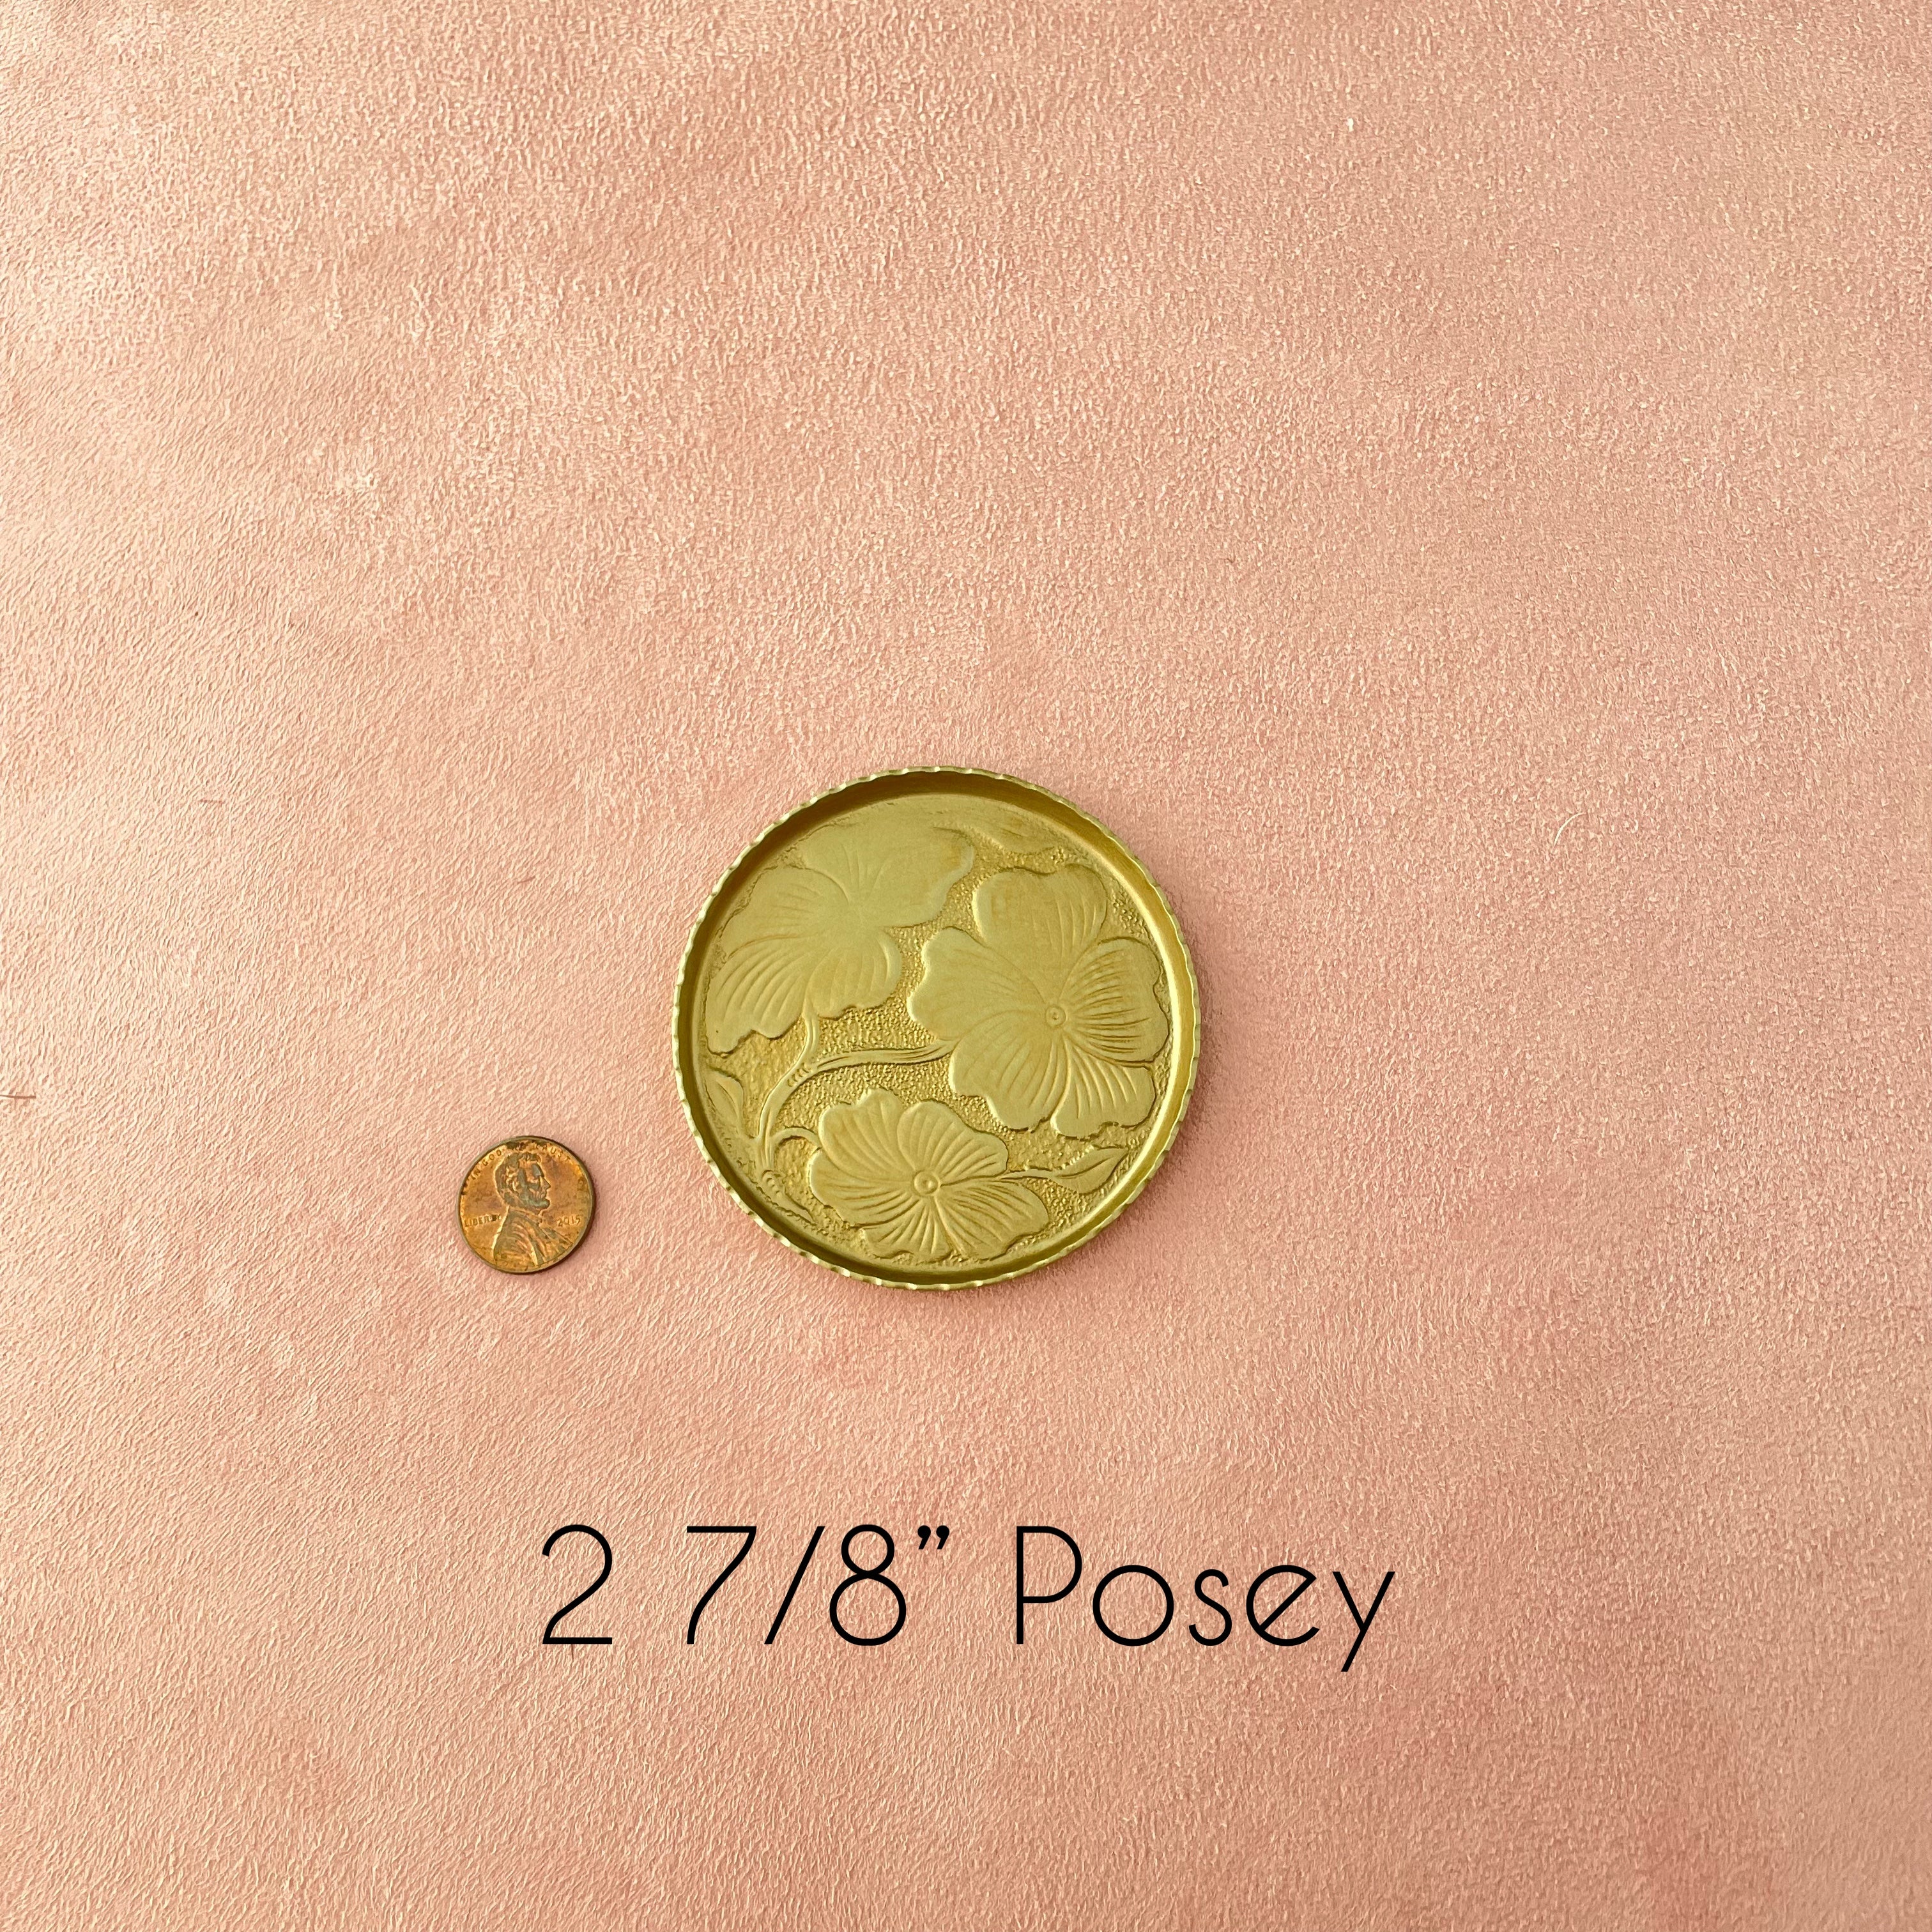 2 ⅞ inch gold posey dish, penny beside for size reference - Wedding Flat lay props from Champagne & GRIT